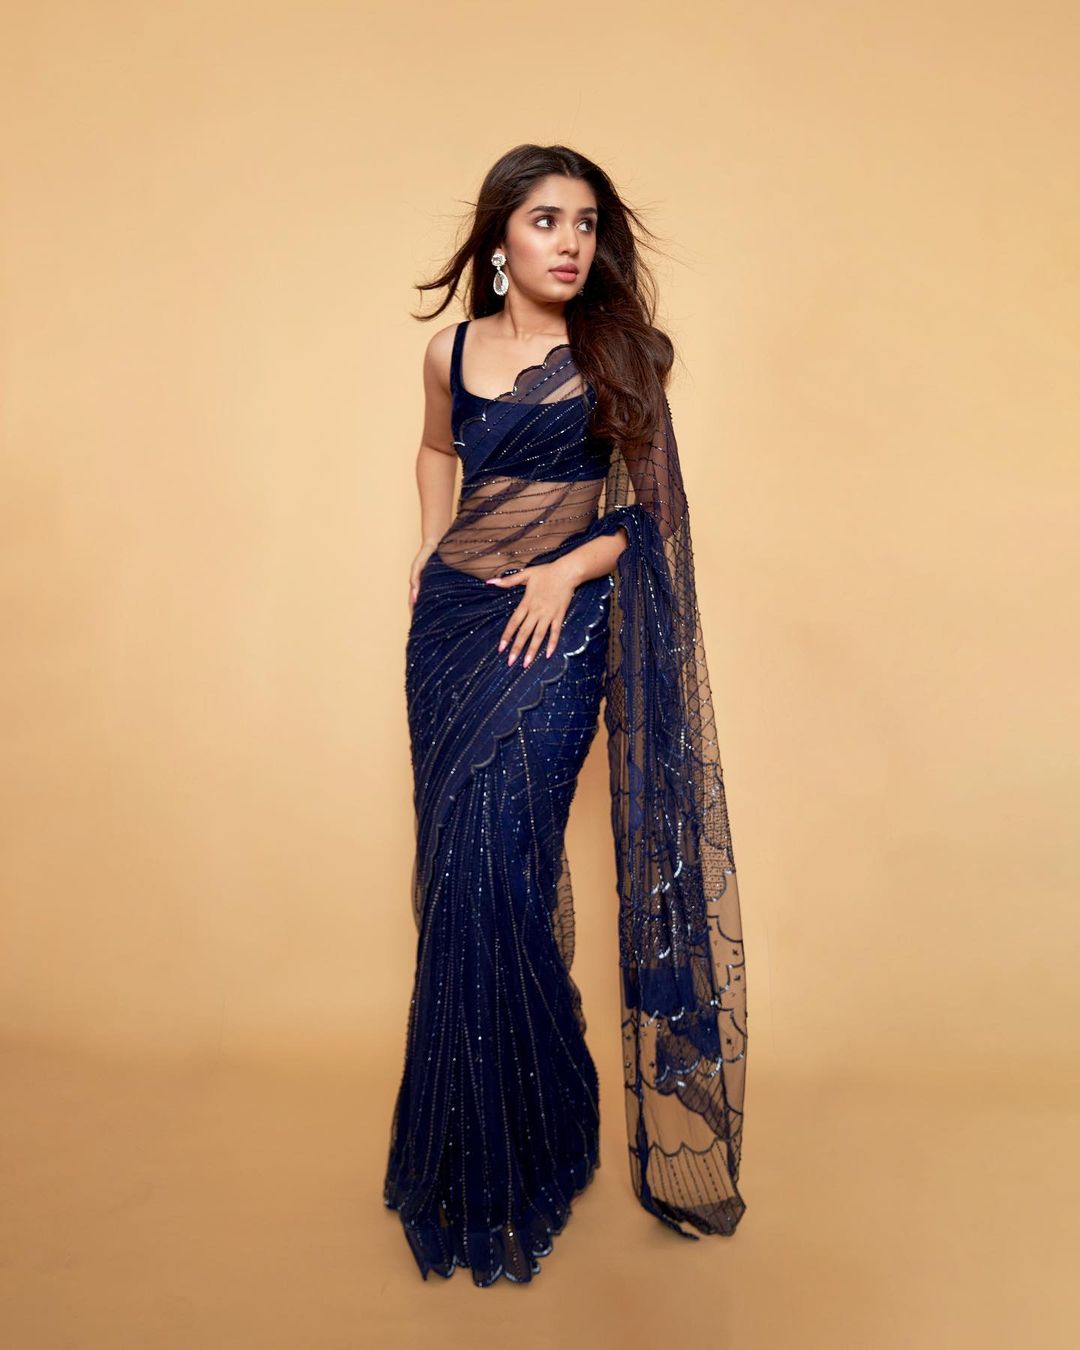 About Born (Date & Place) Full Name Nicknames Height Age [calculate_years datestring="4/15/1997"] years Popular Movies/TV Series Debut Krithi Shetty Setting Some Major Traditional and Ethnic Outfit Look Inspo